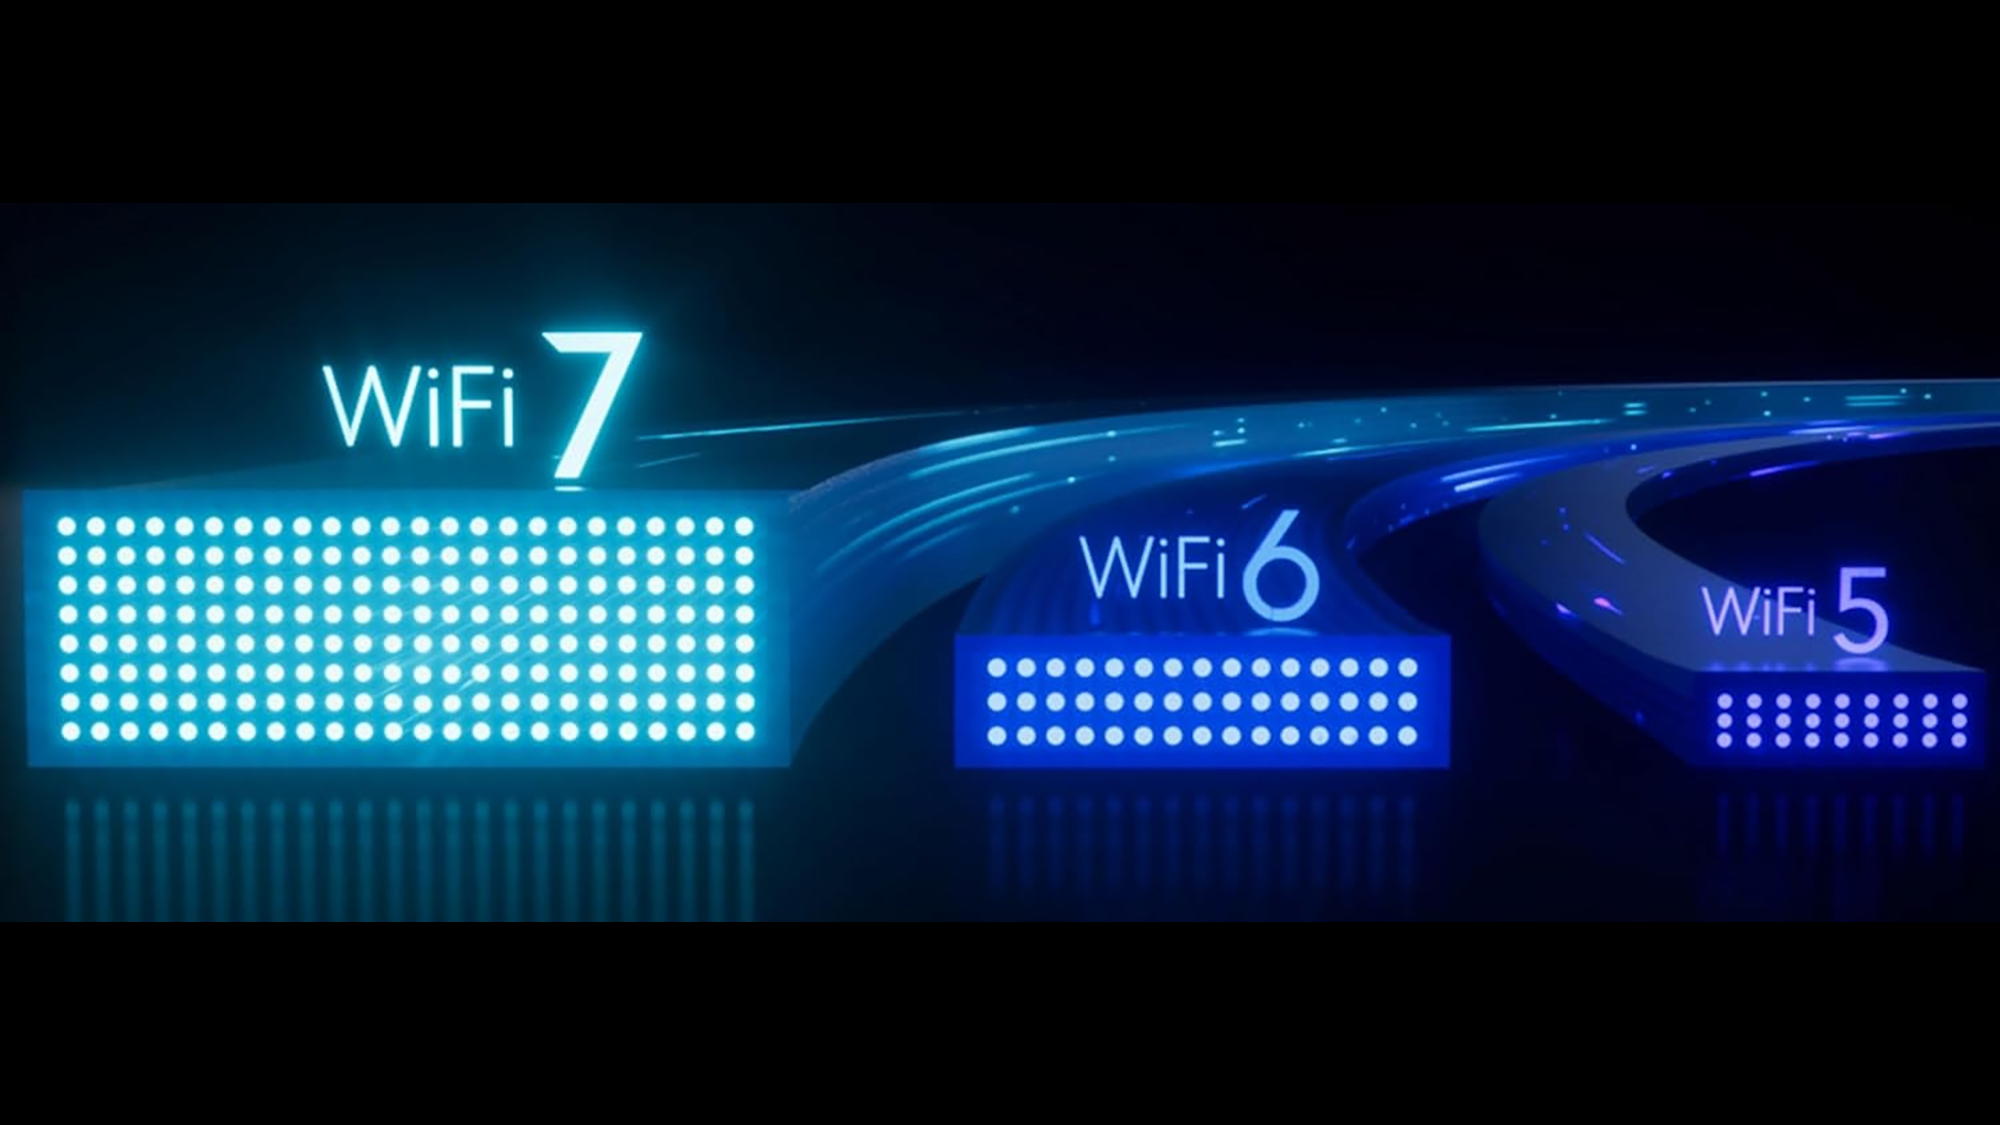 Wi-Fi 7 provides more room for data to travel. Credit: Netgear